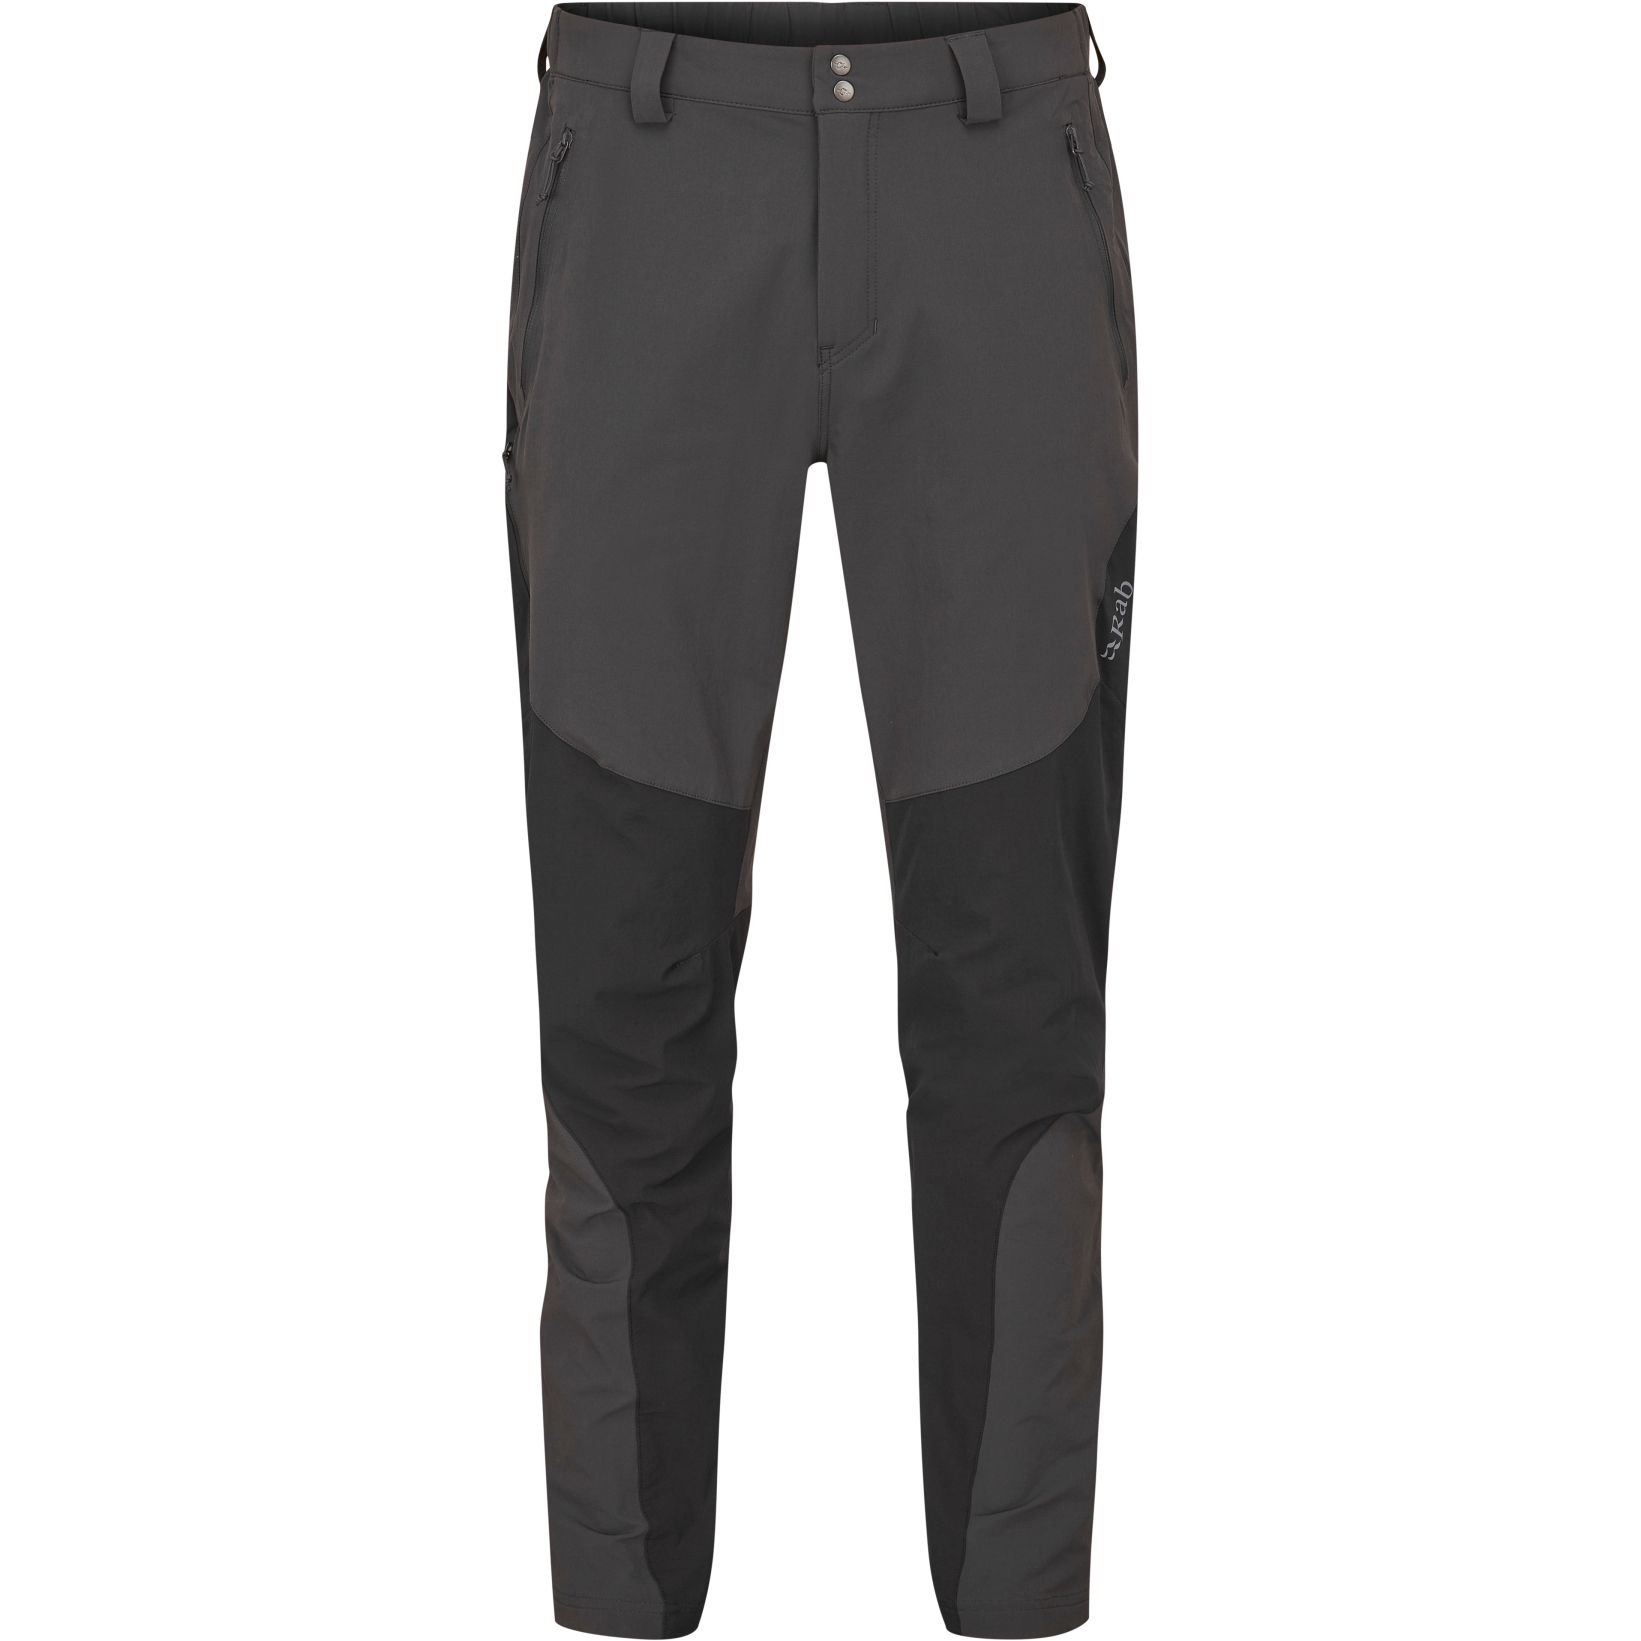 Picture of Rab Torque Mountain Pants Men - anthracite/black